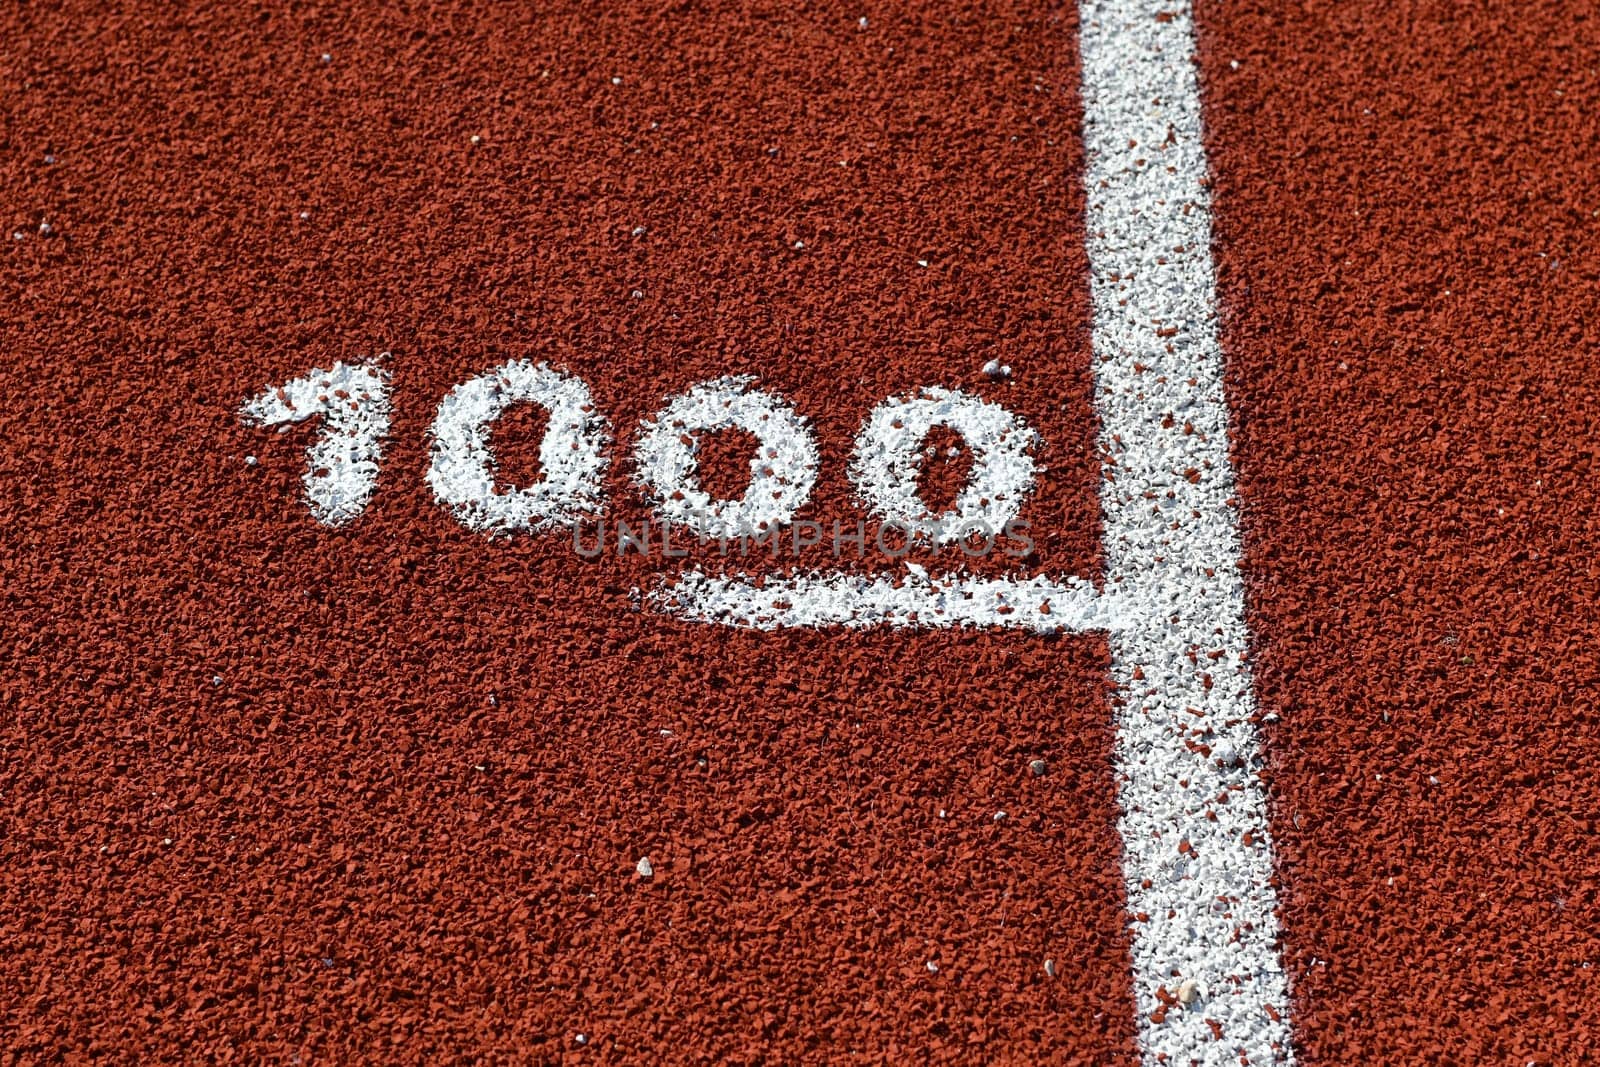 One thousand meter mark on a running track at a stadium